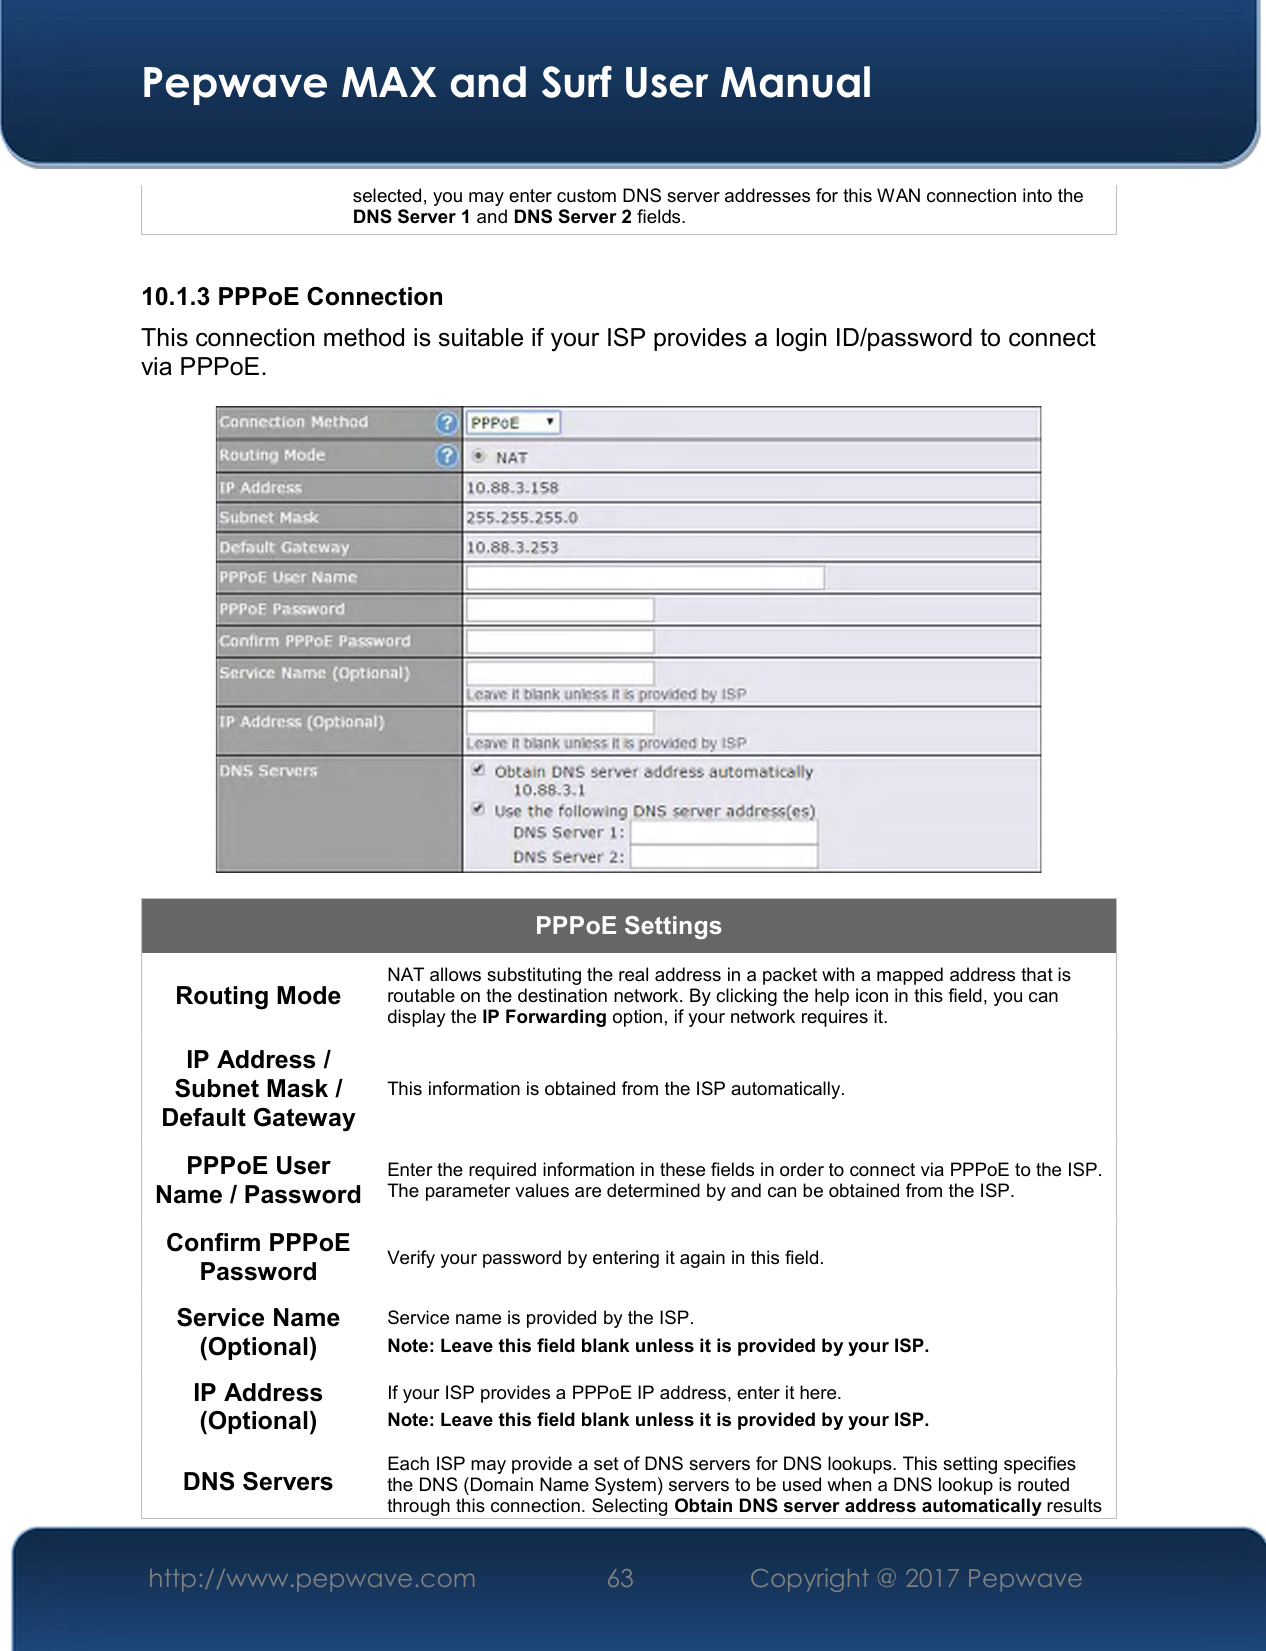  Pepwave MAX and Surf User Manual http://www.pepwave.com  63    Copyright @ 2017 Pepwave   selected, you may enter custom DNS server addresses for this WAN connection into the DNS Server 1 and DNS Server 2 fields.  10.1.3 PPPoE Connection This connection method is suitable if your ISP provides a login ID/password to connect via PPPoE.  PPPoE Settings Routing Mode  NAT allows substituting the real address in a packet with a mapped address that is routable on the destination network. By clicking the help icon in this field, you can display the IP Forwarding option, if your network requires it. IP Address / Subnet Mask / Default Gateway This information is obtained from the ISP automatically. PPPoE User Name / Password Enter the required information in these fields in order to connect via PPPoE to the ISP. The parameter values are determined by and can be obtained from the ISP. Confirm PPPoE Password  Verify your password by entering it again in this field. Service Name (Optional) Service name is provided by the ISP. Note: Leave this field blank unless it is provided by your ISP.  IP Address (Optional) If your ISP provides a PPPoE IP address, enter it here. Note: Leave this field blank unless it is provided by your ISP.  DNS Servers  Each ISP may provide a set of DNS servers for DNS lookups. This setting specifies the DNS (Domain Name System) servers to be used when a DNS lookup is routed through this connection. Selecting Obtain DNS server address automatically results 